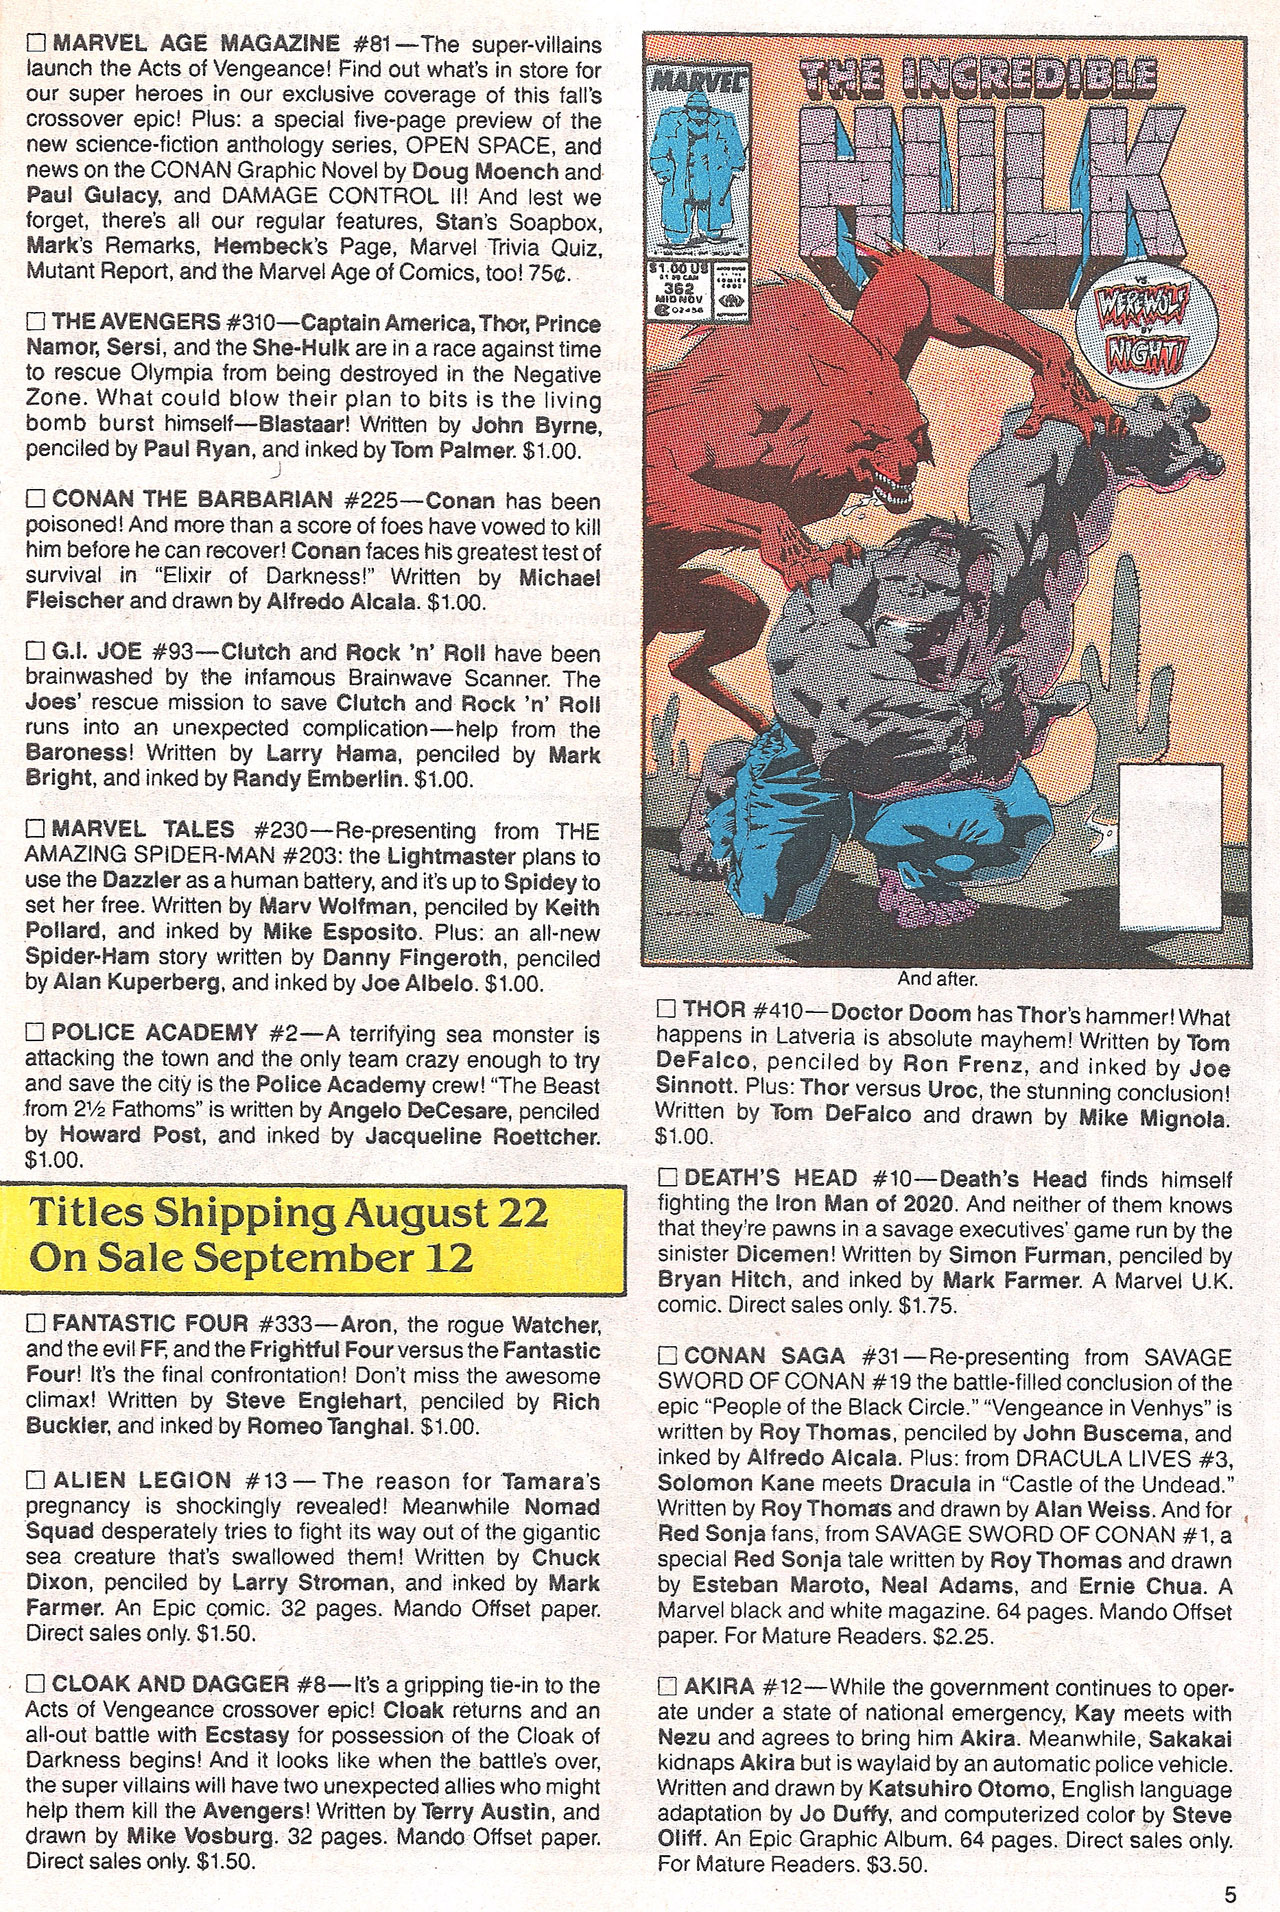 Read online Marvel Age comic -  Issue #80 - 7